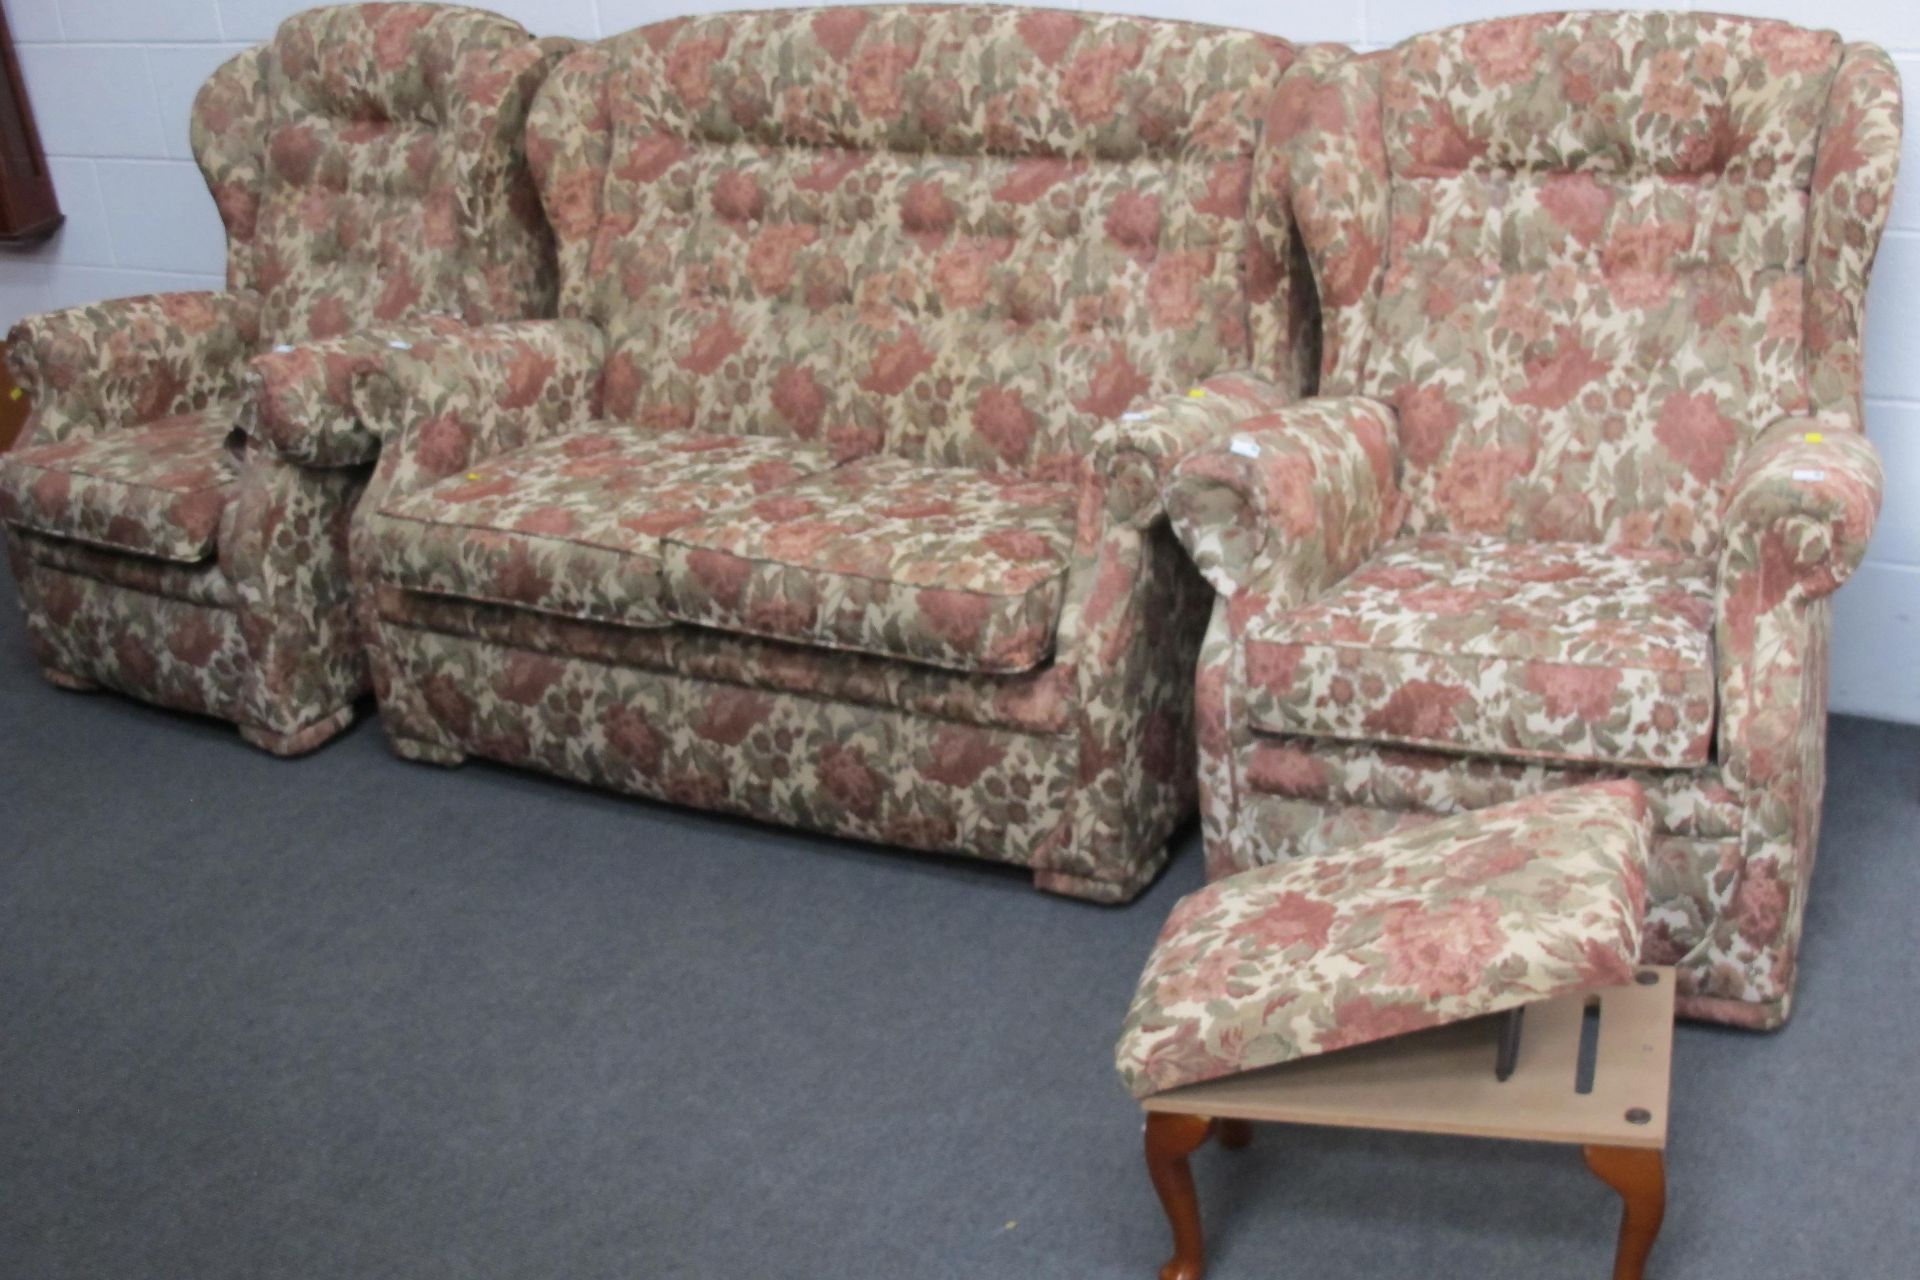 A fabric covered three piece suite - a two seat settee & two wing back armchairs all with floral